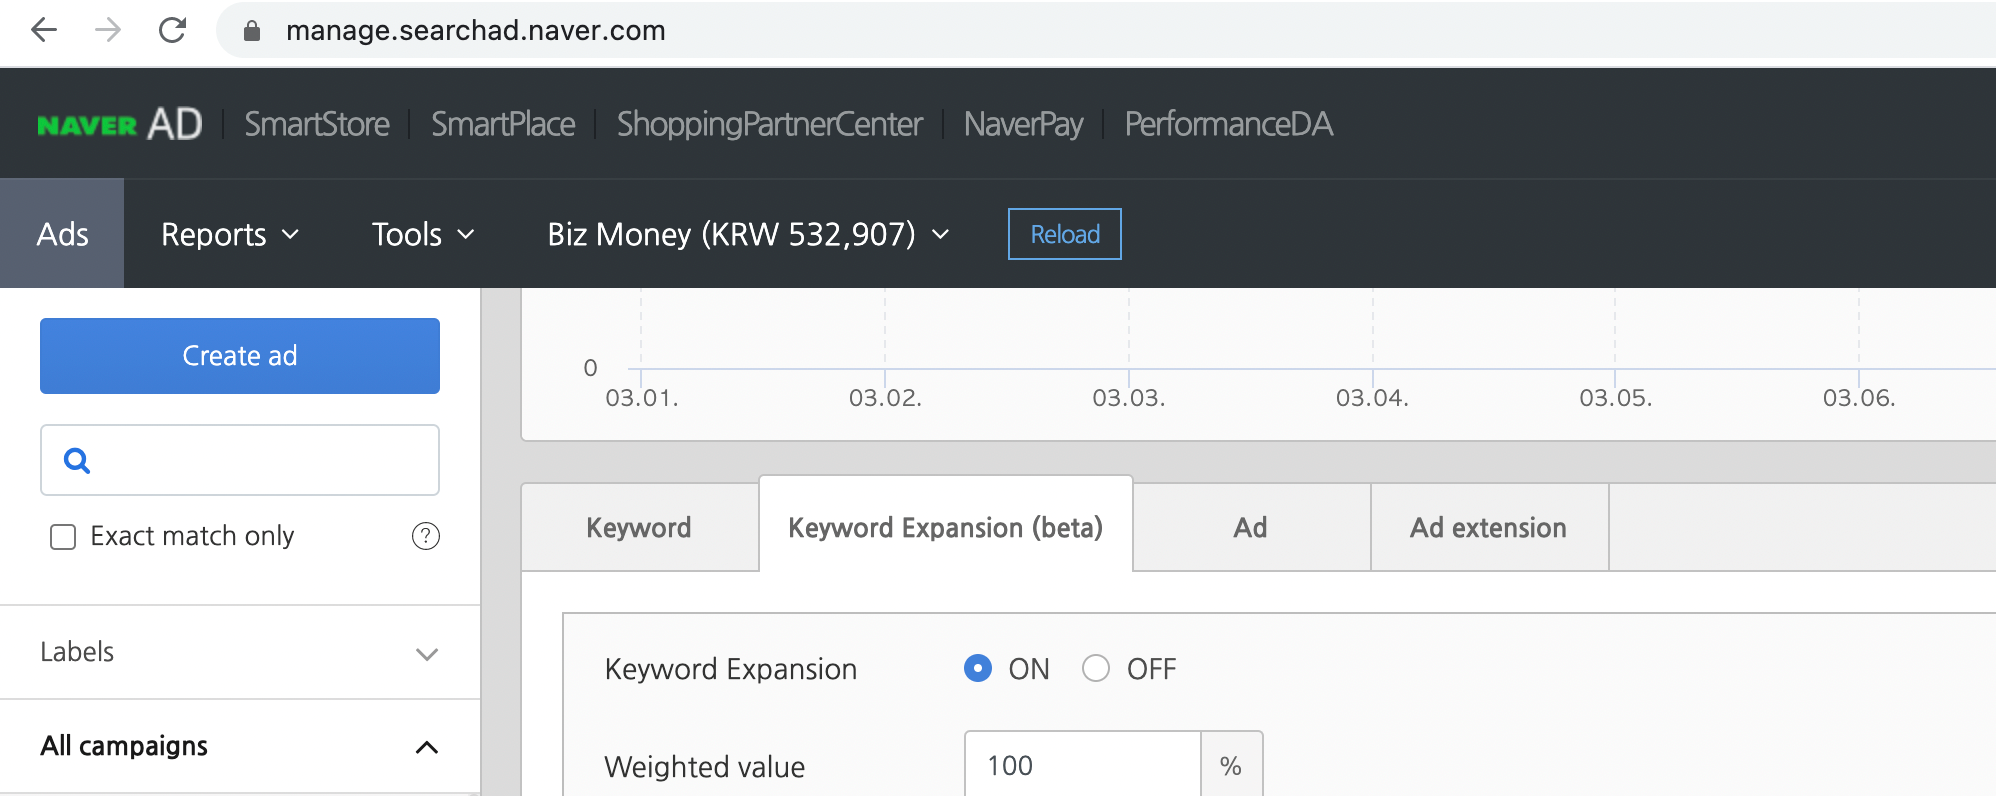 Keyword Matching Options in Naver search - Showing Keyword Expansion (beta)